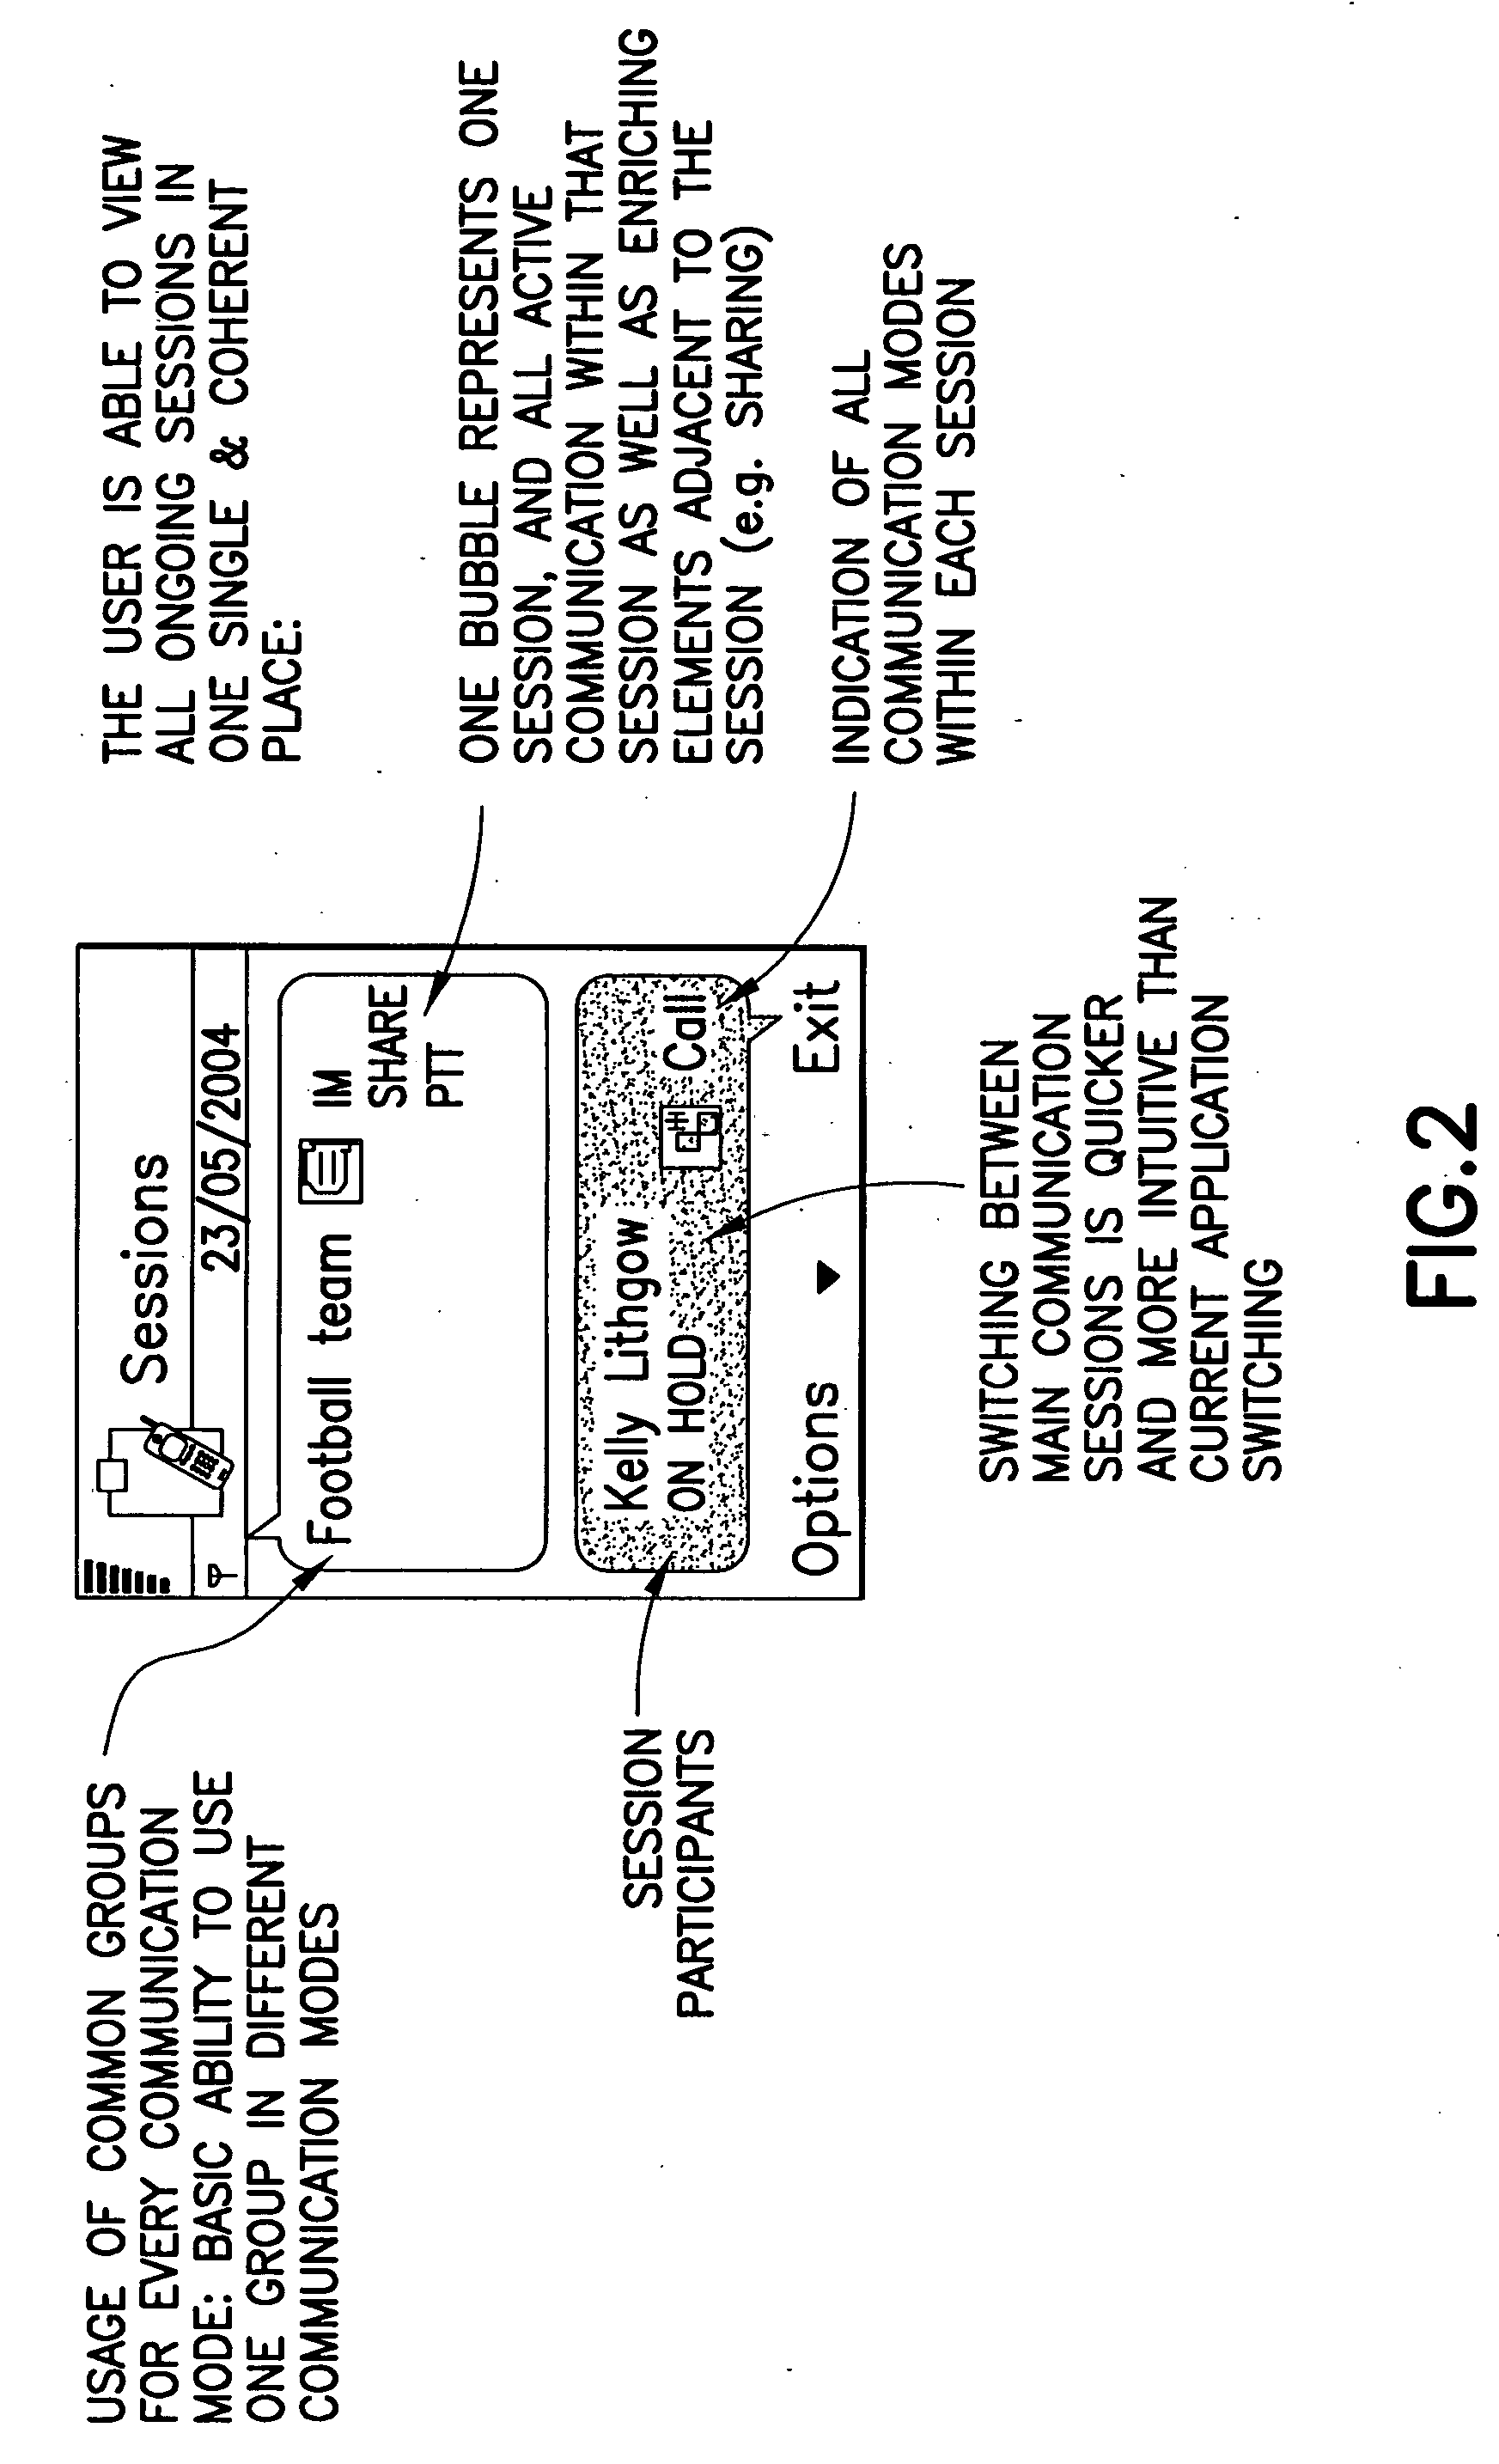 Method, apparatus and computer program product providing graphical user interface that facilitates management of multiple simultaneous communication sessions